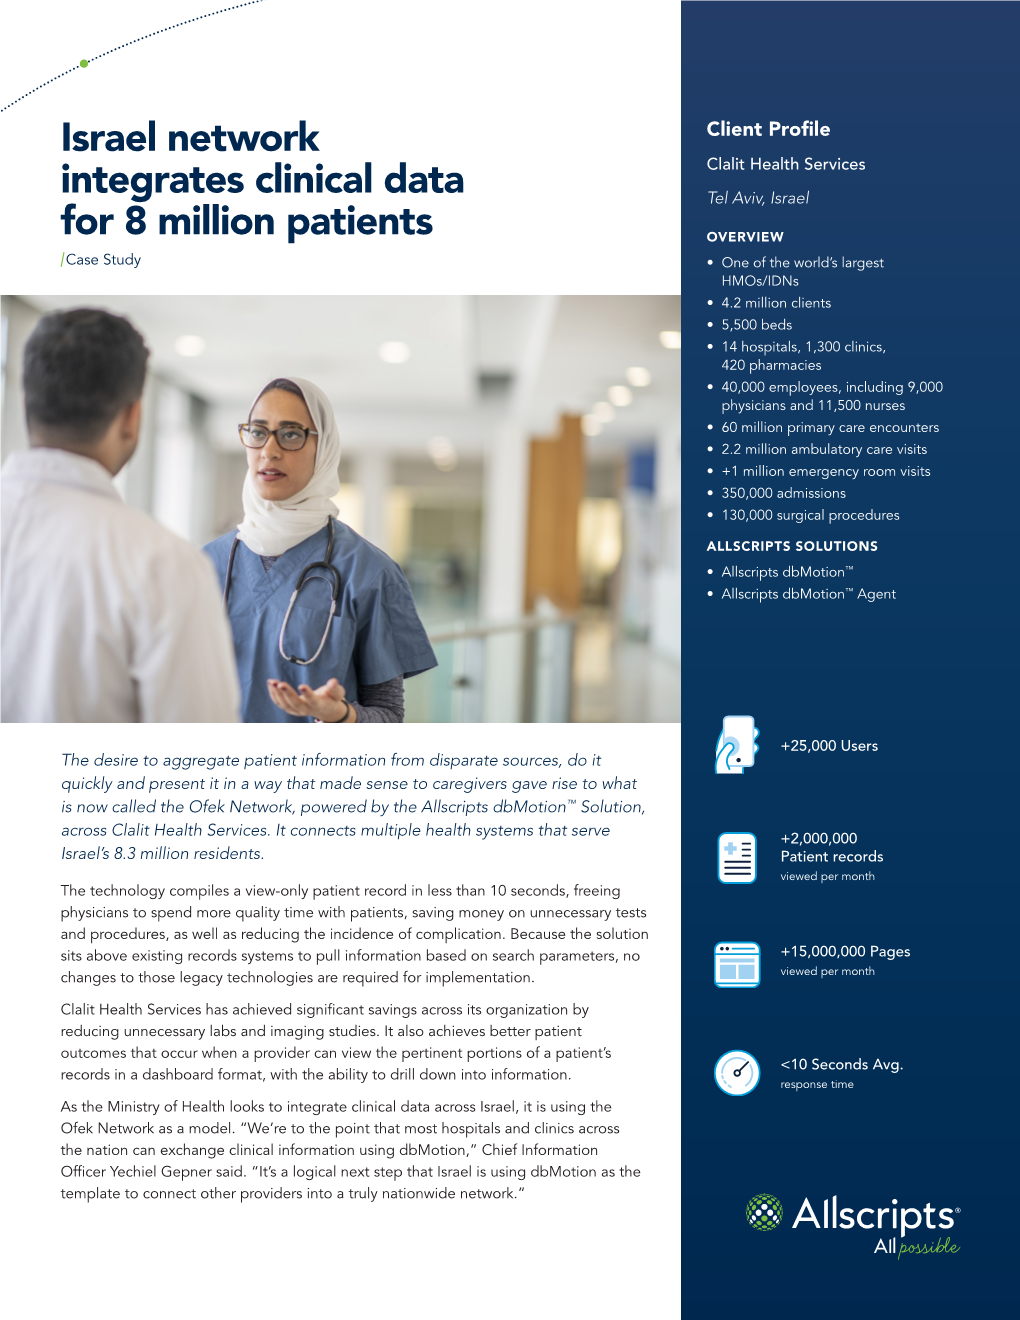 Israel Network Integrates Clinical Data for 8 Million Patients